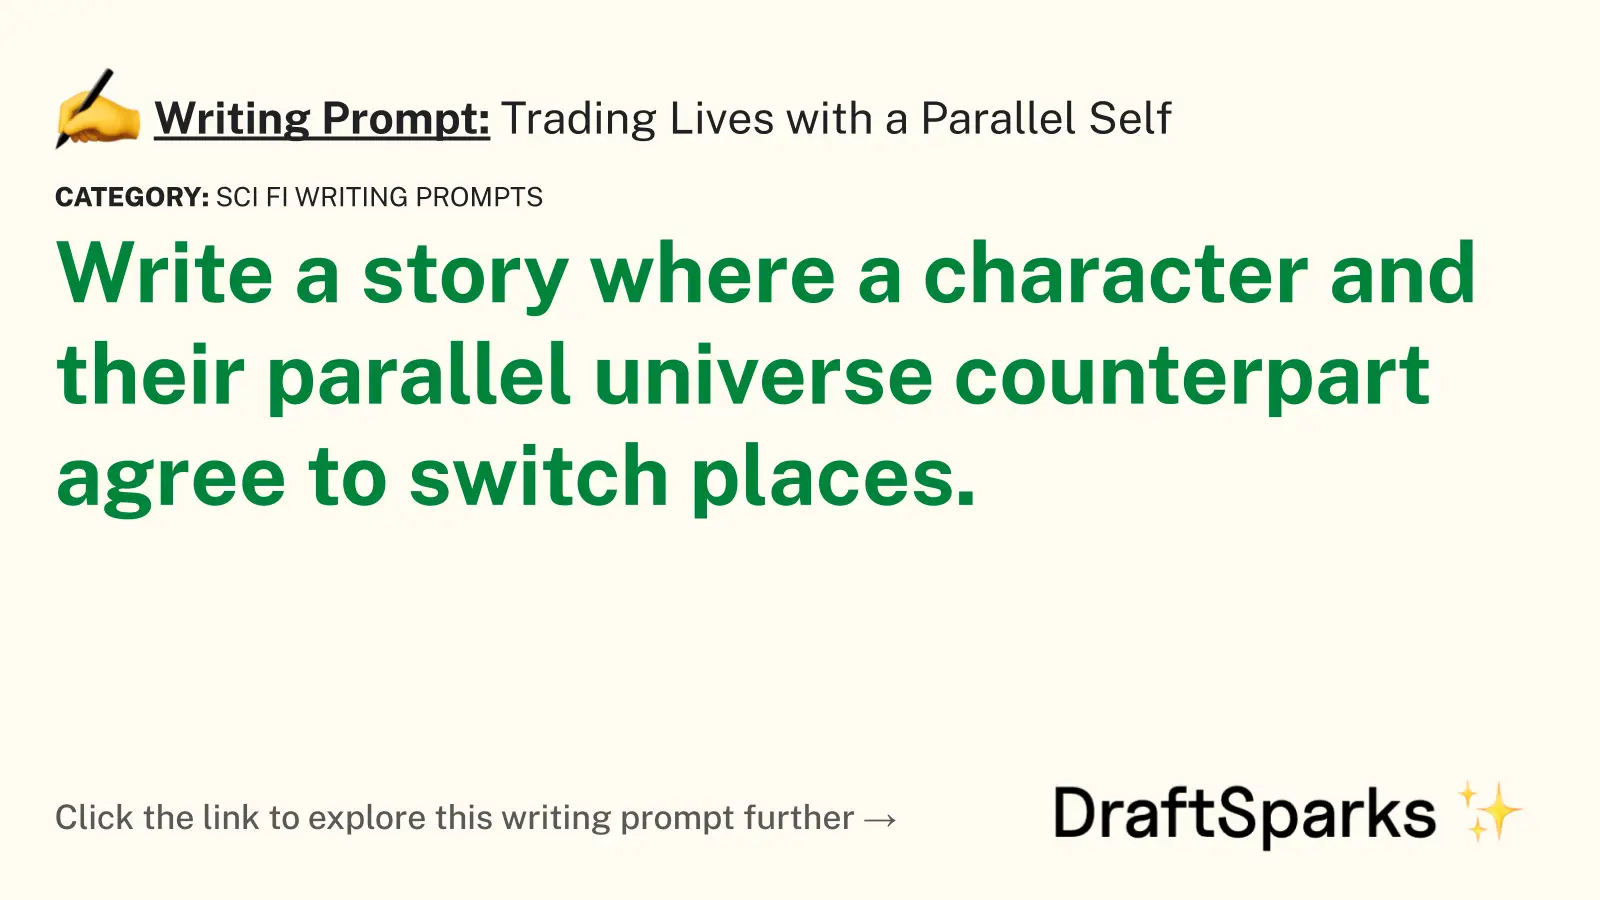 Trading Lives with a Parallel Self